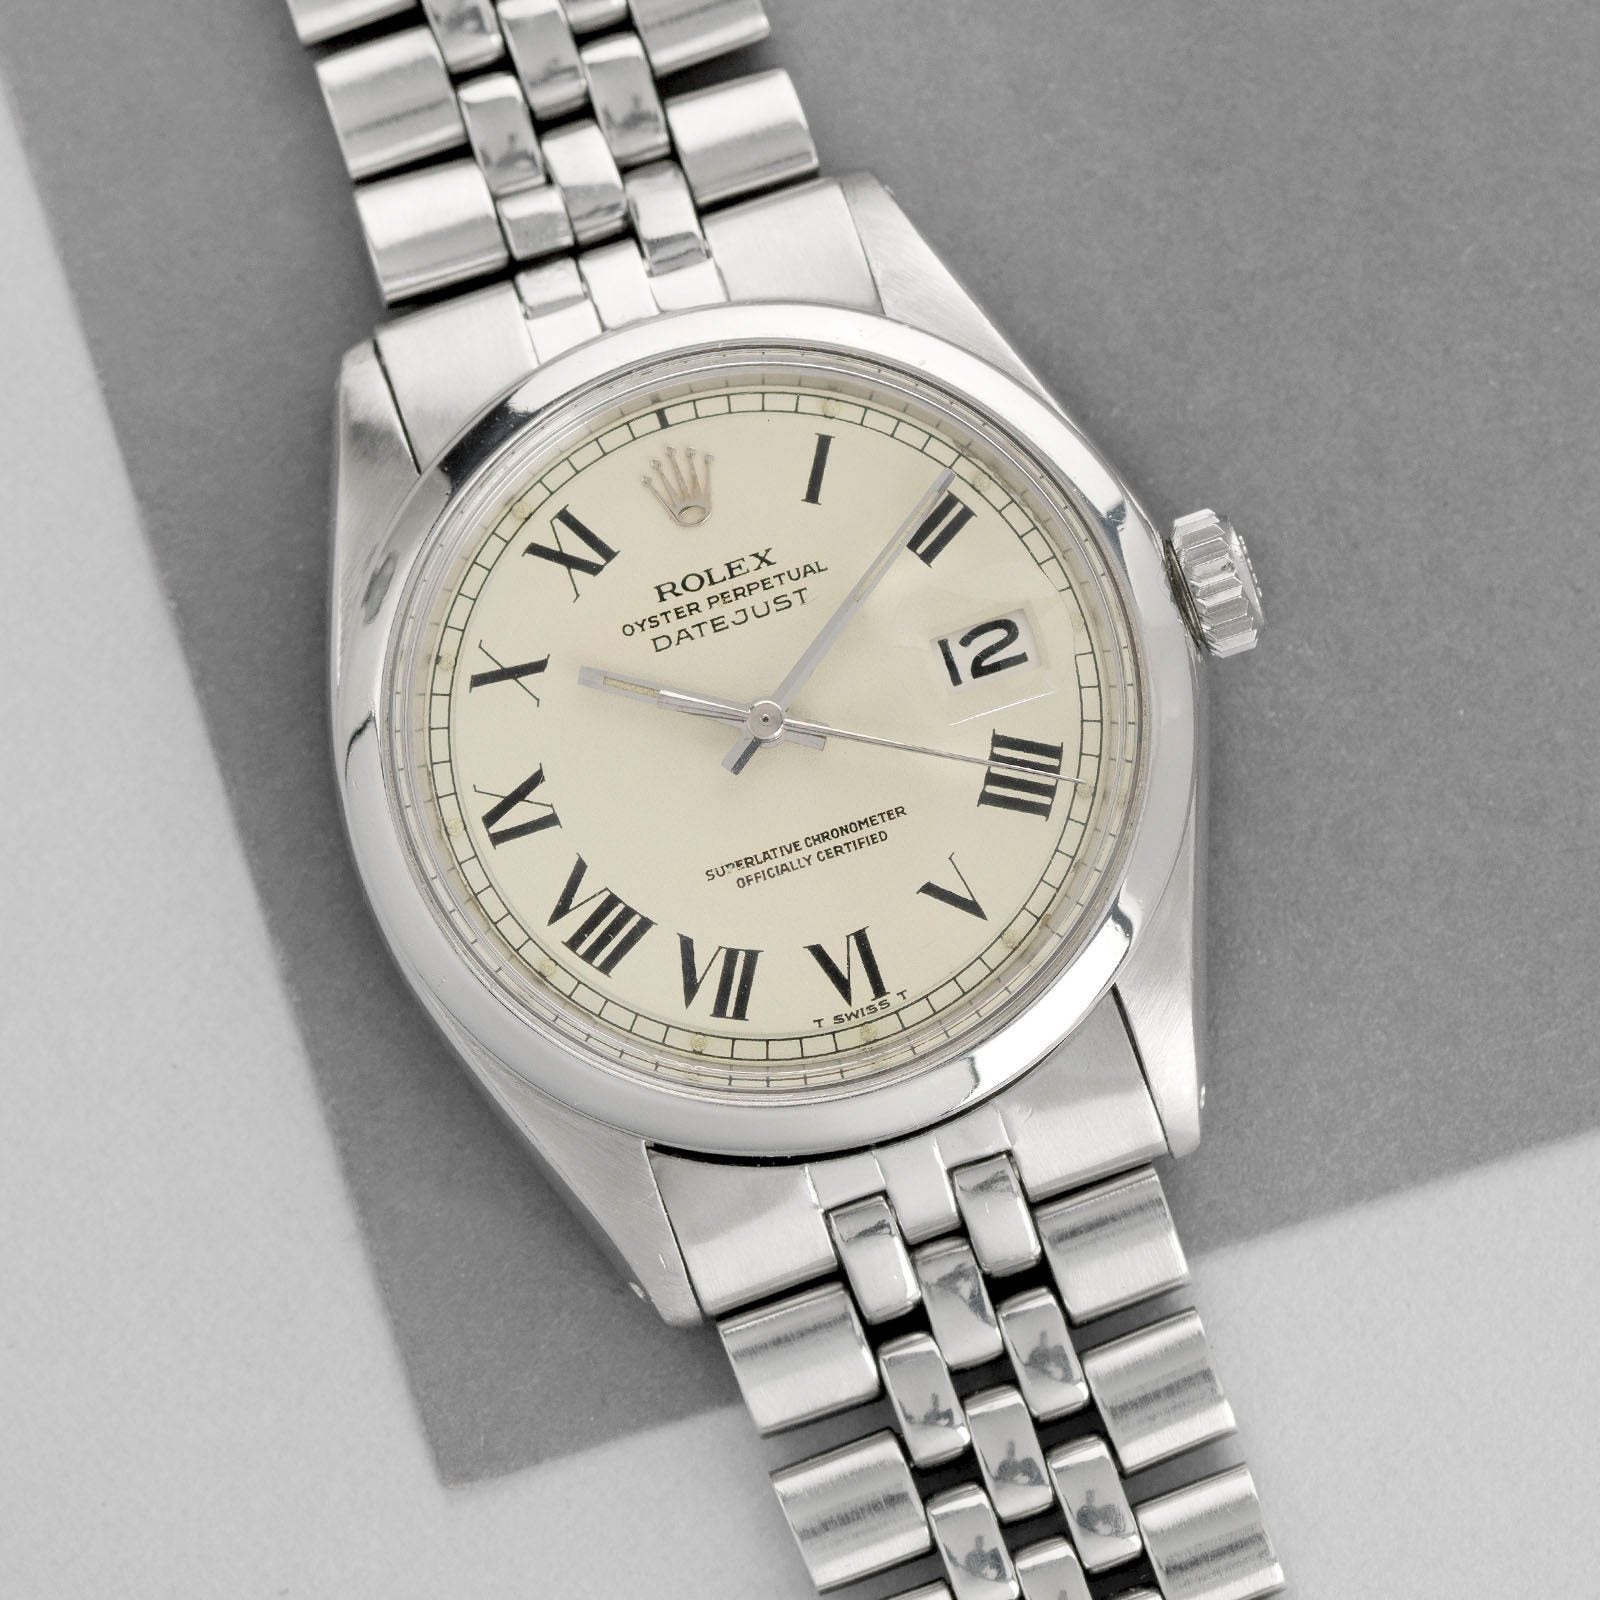 Rolex Datejust Reference 1600 Cream Buckley Dial